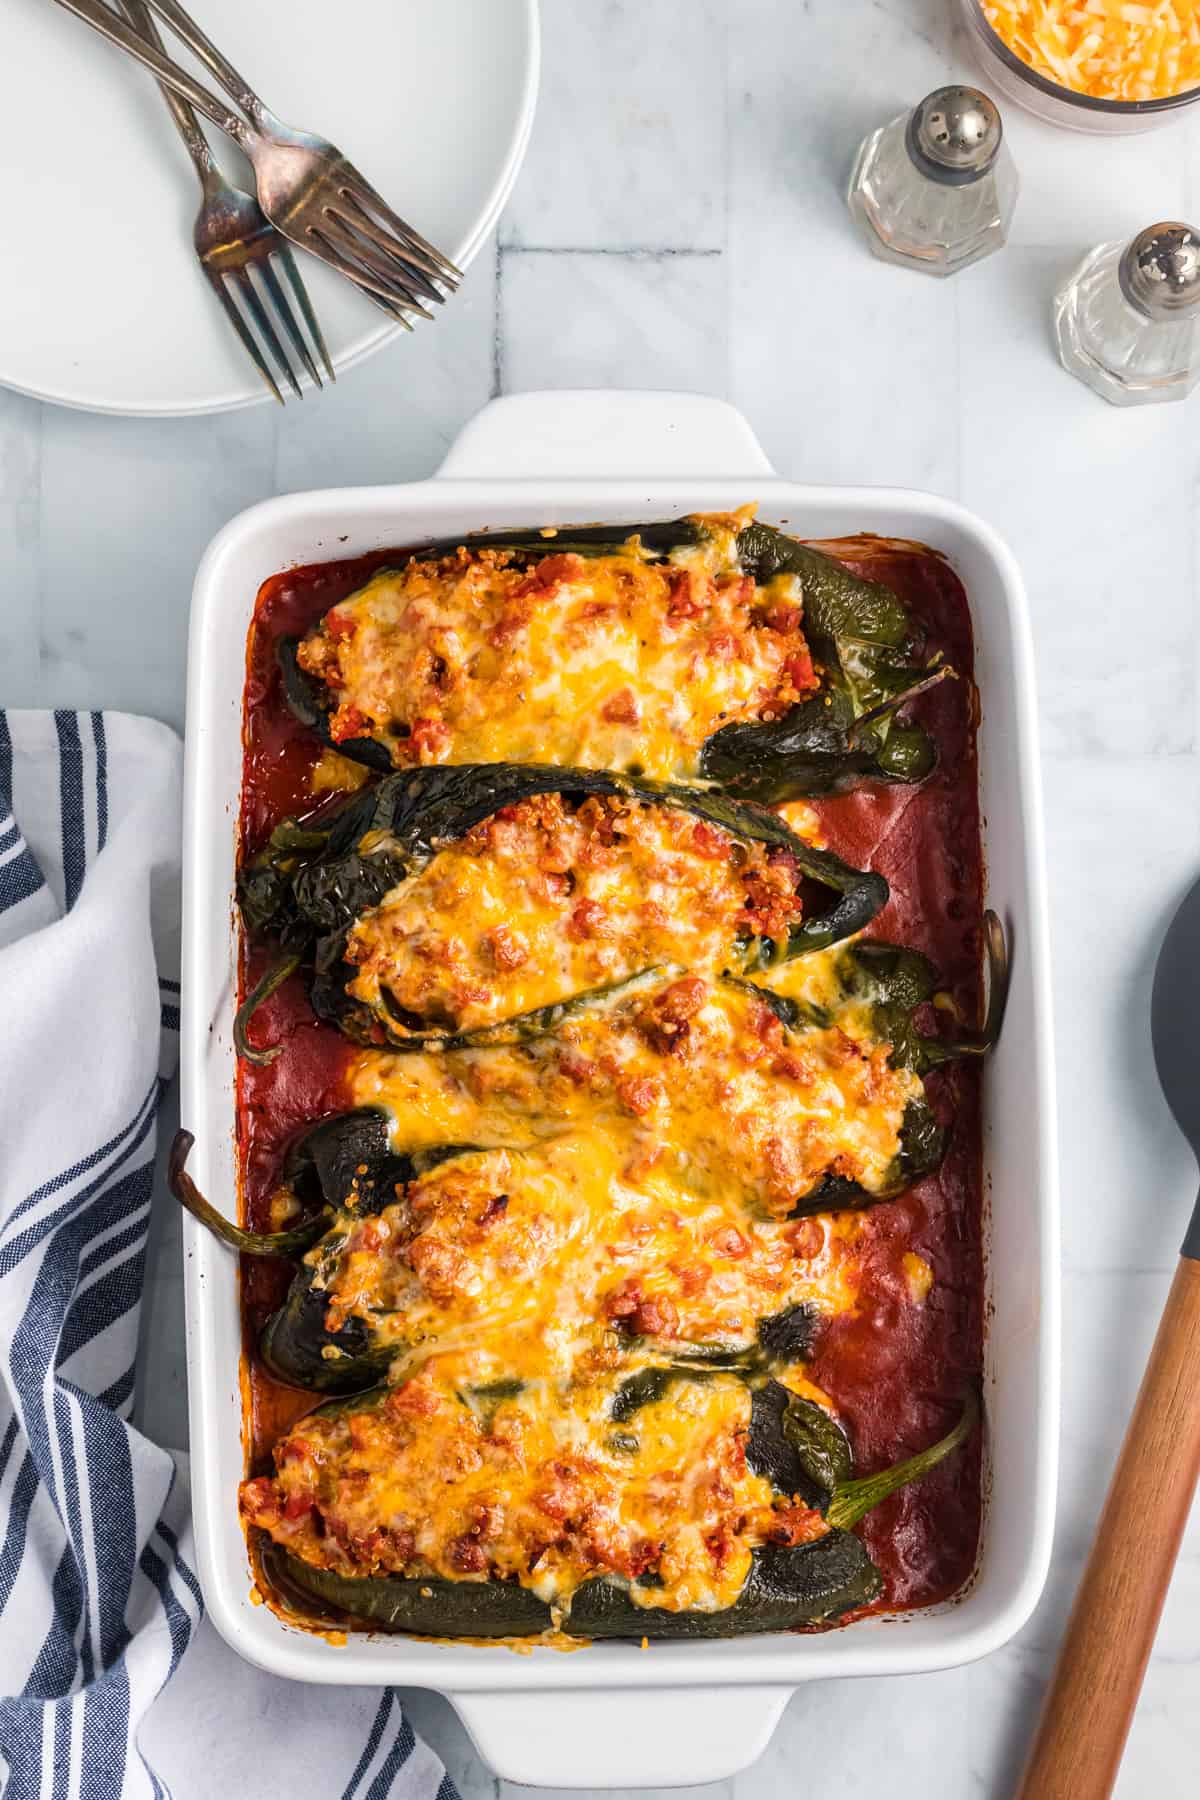 Four cooked stuffed peppers are arranged in a white baking dish.